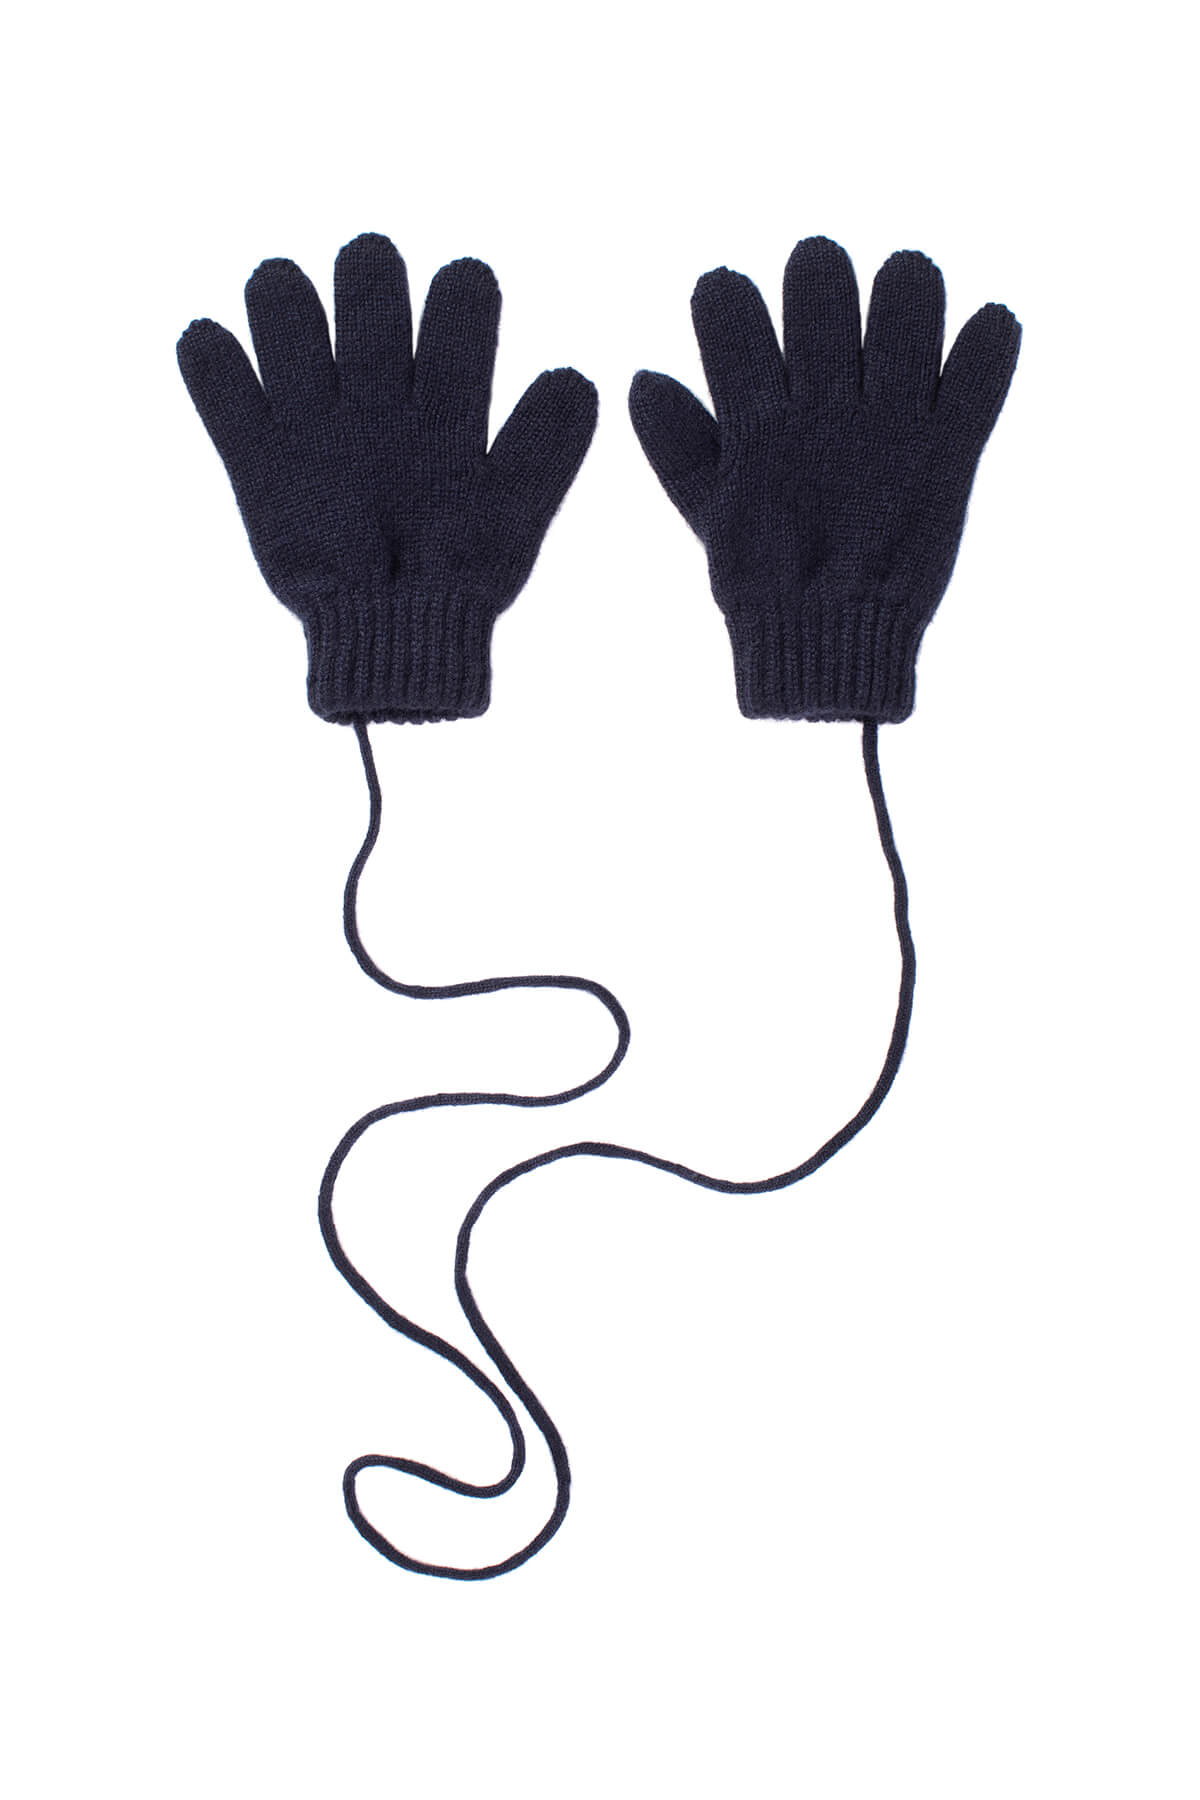 Johnstons of Elgin Children's Cashmere Gloves in Navy with Cashmere String on white background HAD02203SD0707